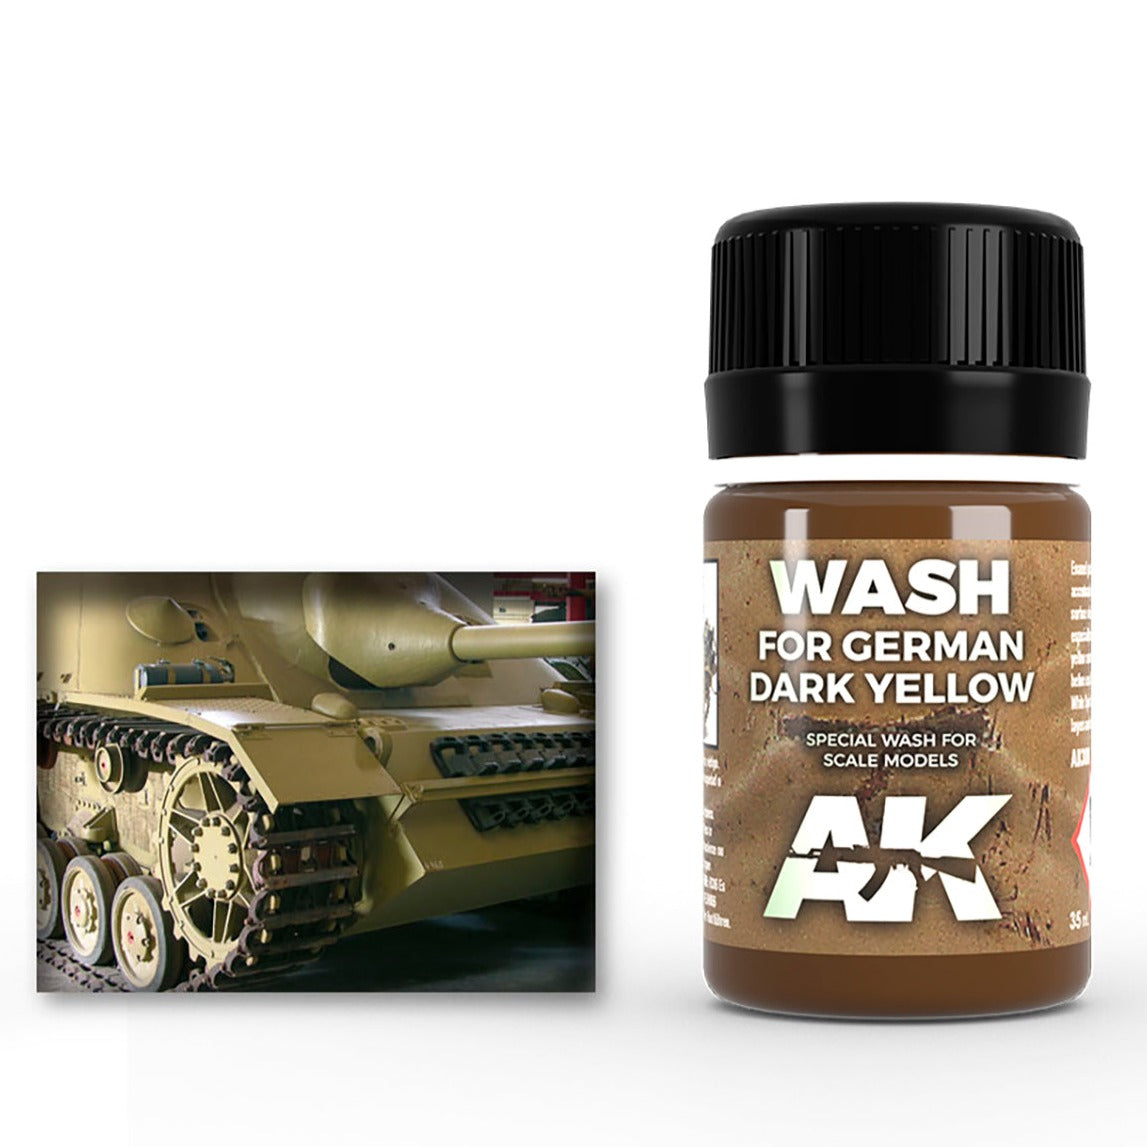 Wash for Dark Yellow Vehicles - Loaded Dice